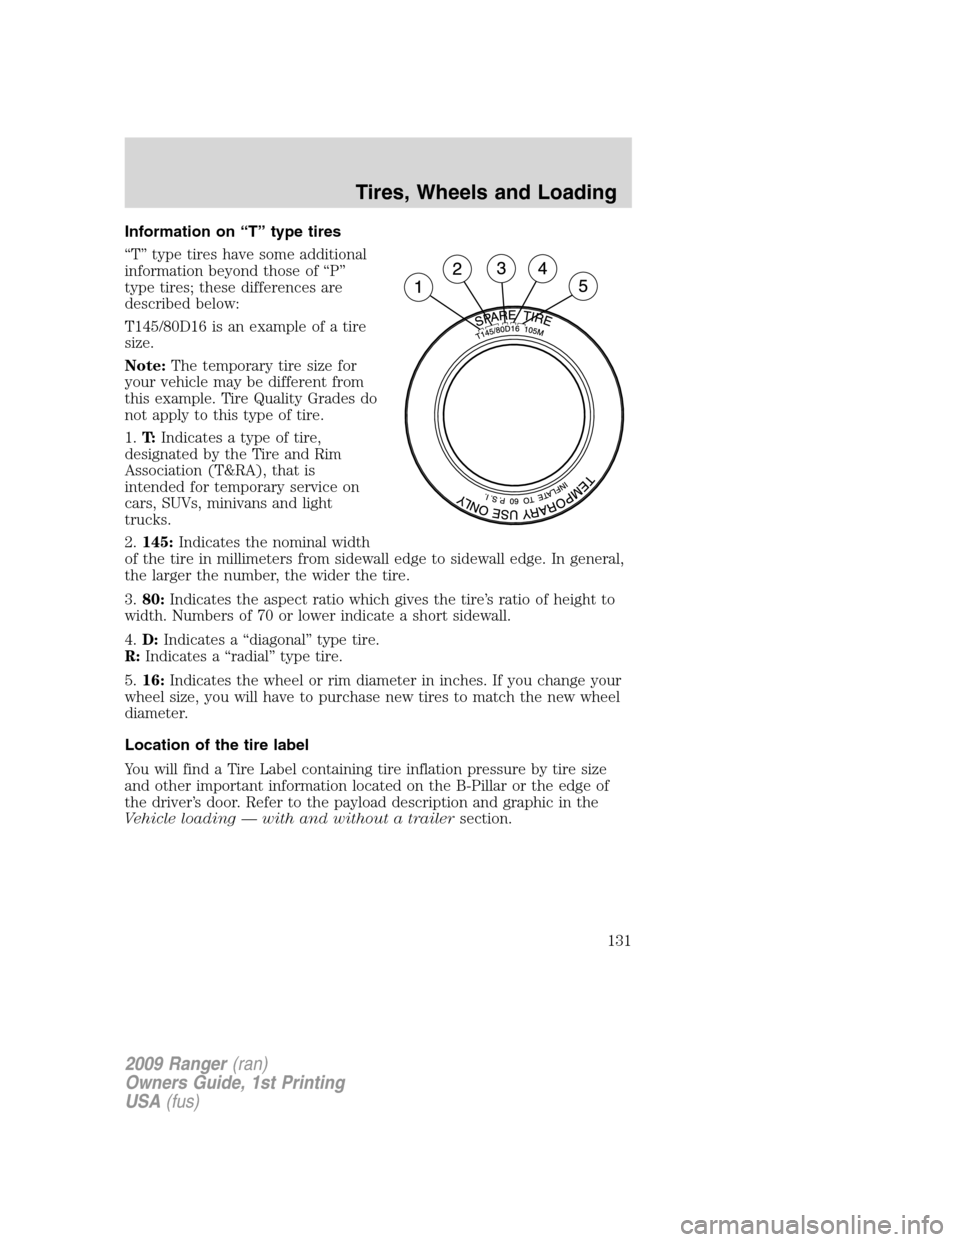 FORD RANGER 2009 2.G Owners Manual Information on “T” type tires
“T” type tires have some additional
information beyond those of “P”
type tires; these differences are
described below:
T145/80D16 is an example of a tire
size